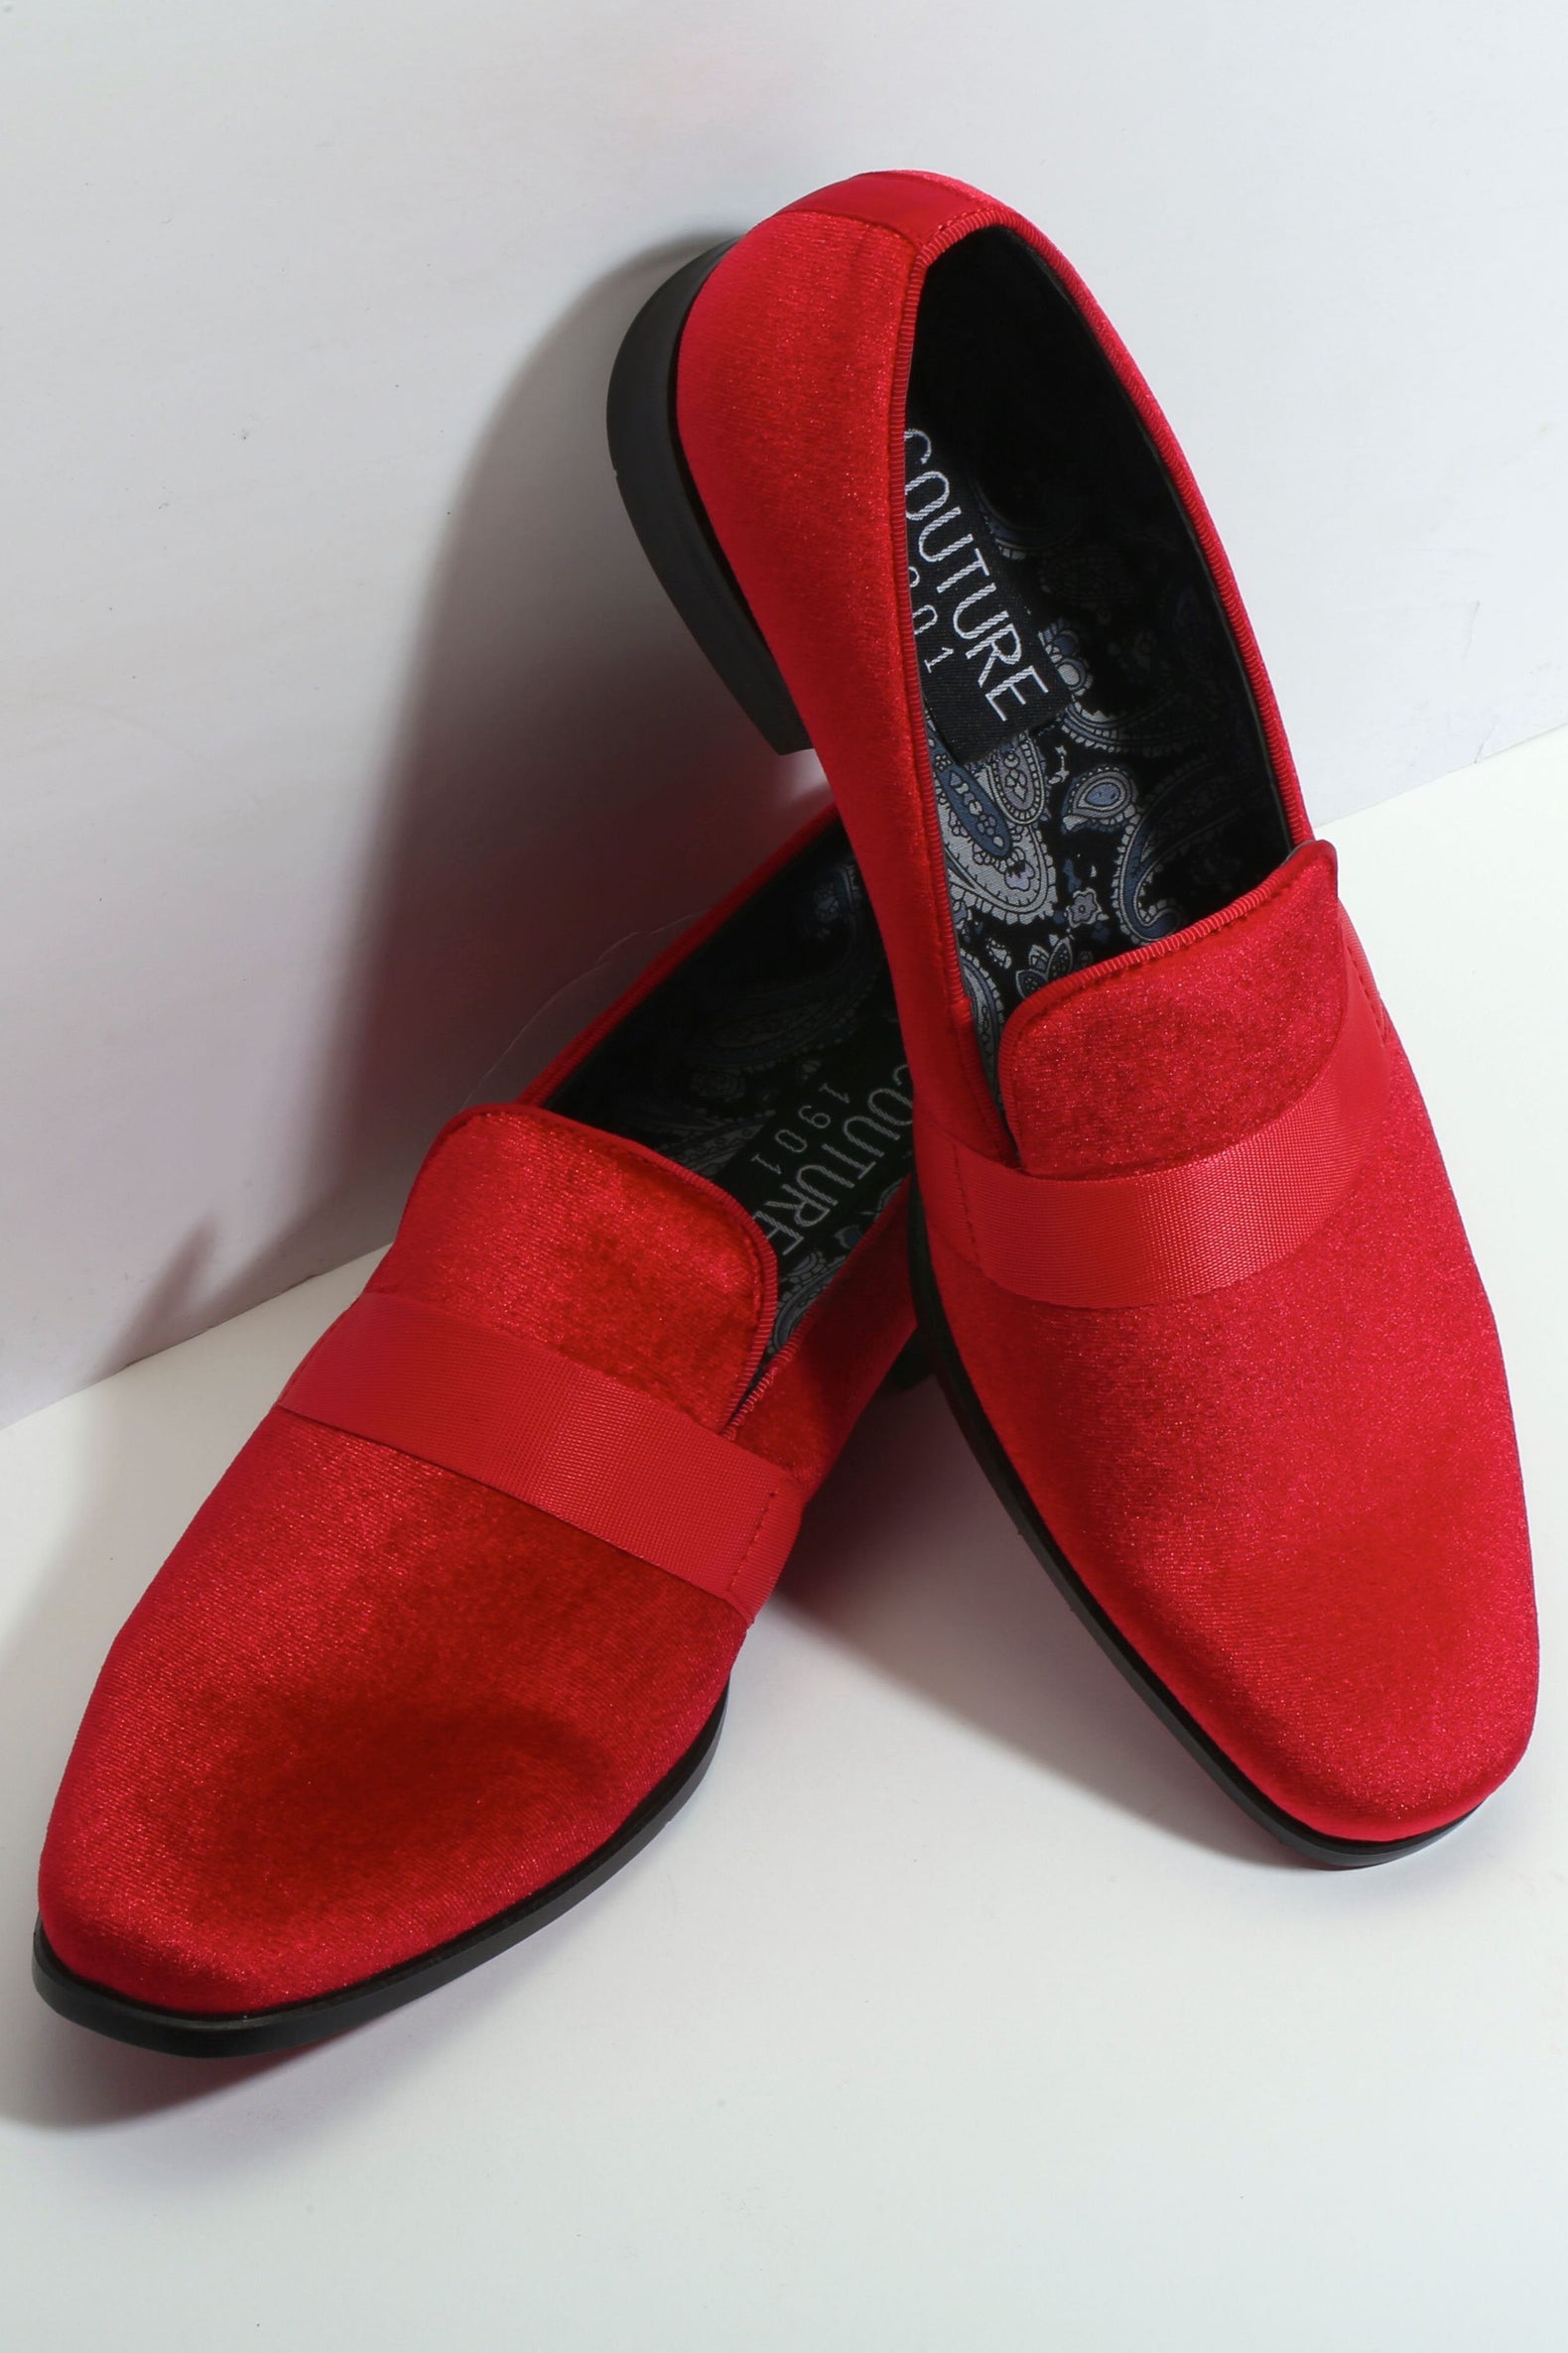 Couture 1901 "Lincoln" Red Couture 1901 Tuxedo Shoes